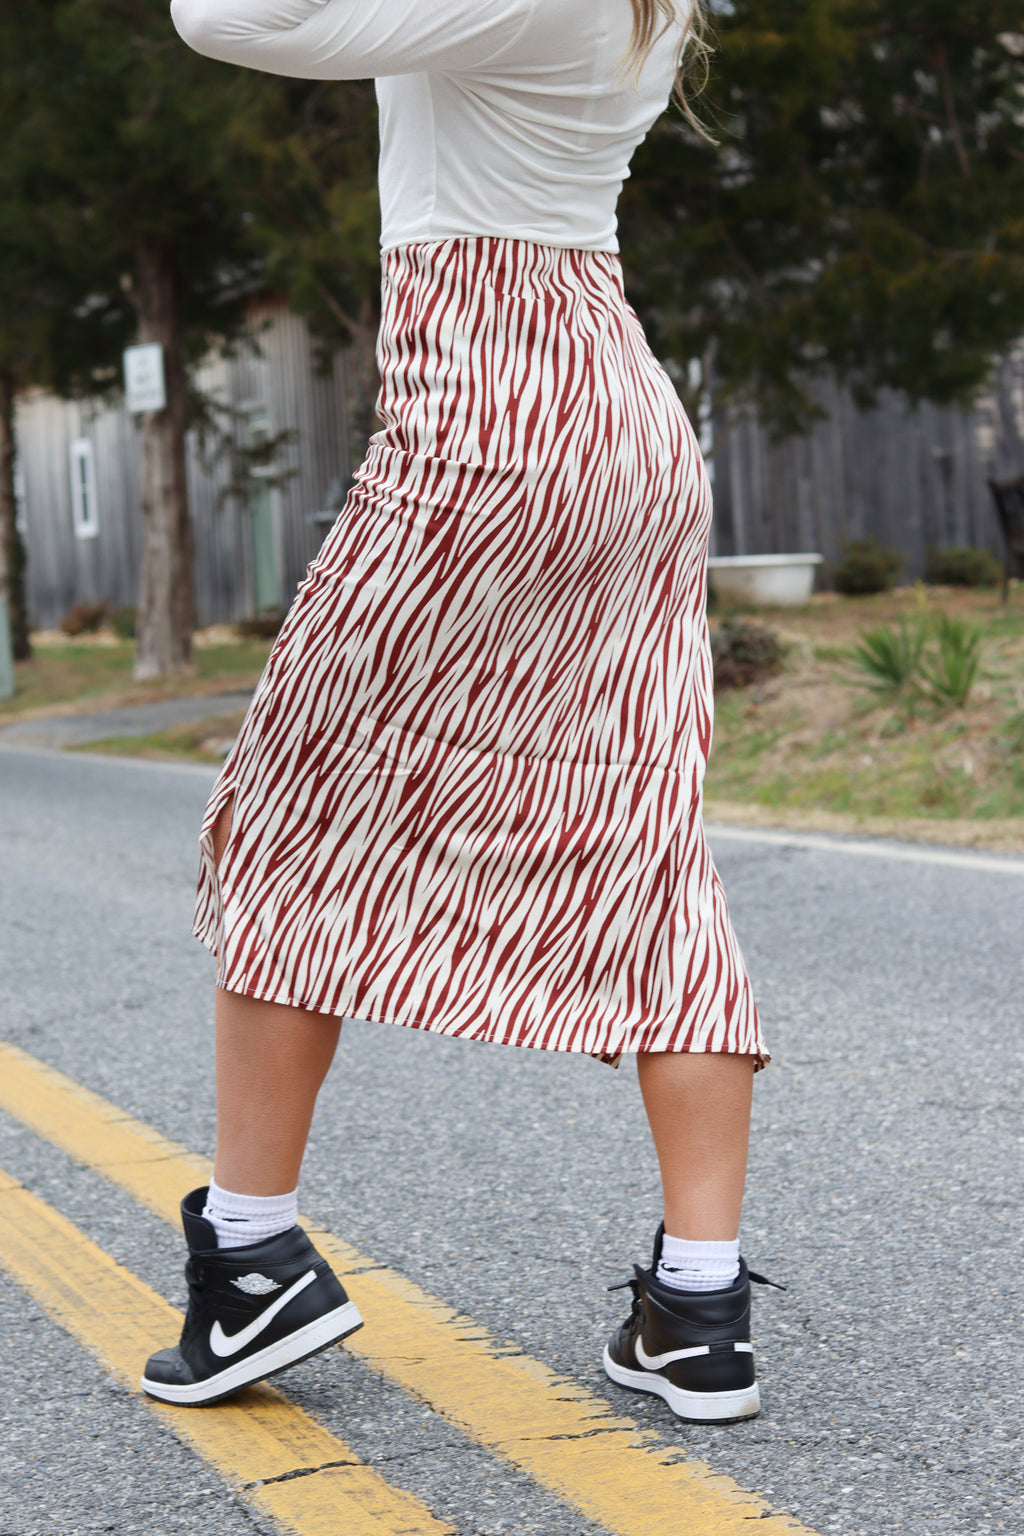 the ally cat walk boutique, theallycatwalk, western, star jacket, boutique, shacket, corduroy, womens style, trends, womens fashion, winter style, spring style, country shirt, luke combs tee, boots, nashville, graphic tee, zebra, skirt, satin, midi skirt, midi